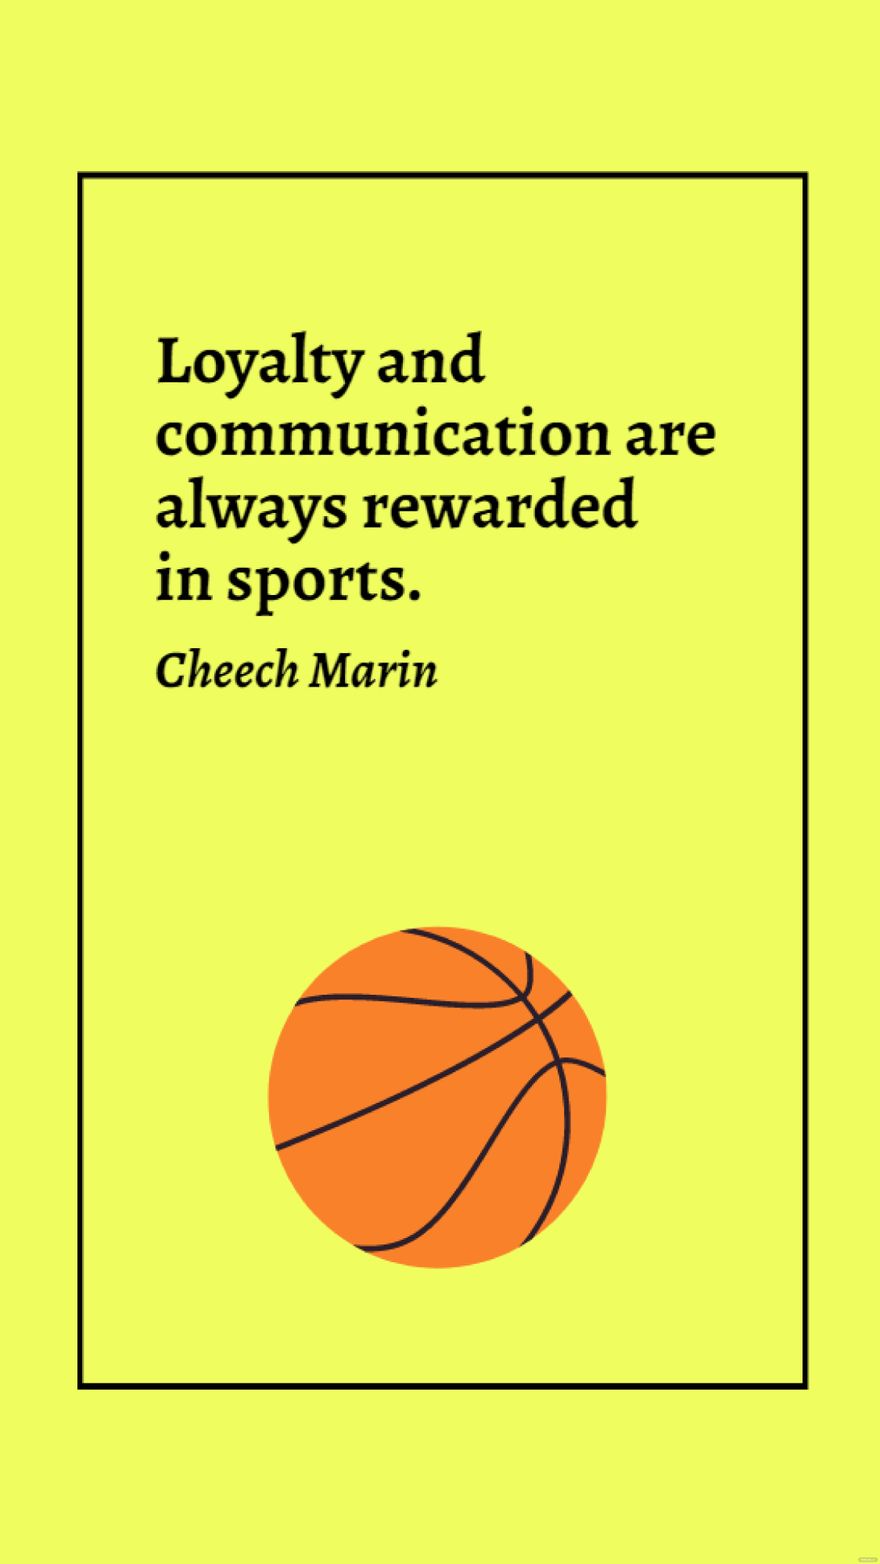 Cheech Marin - Loyalty and communication are always rewarded in sports. in JPG